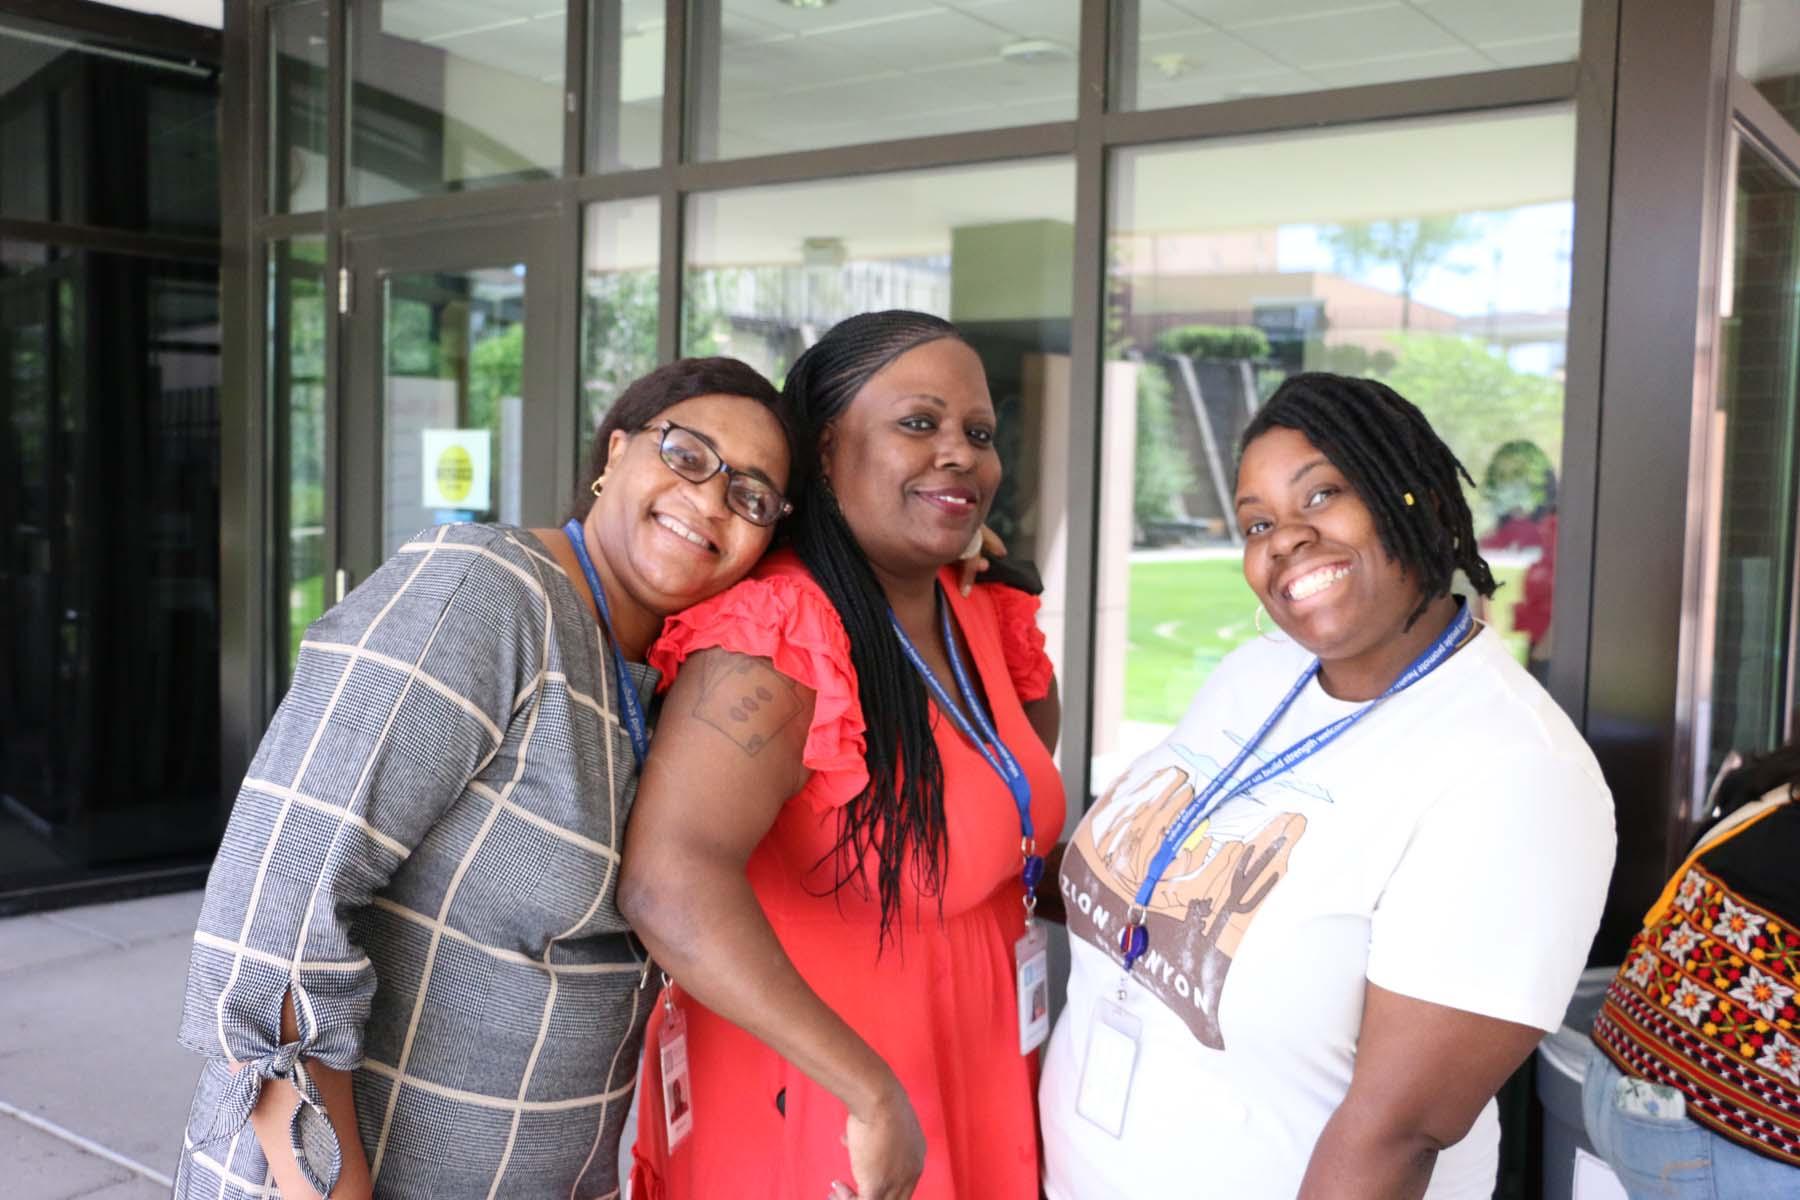 Three colleagues at the African American Babies Coalition and projects pose together during the Wilder staff appreciation picnic in July 2022